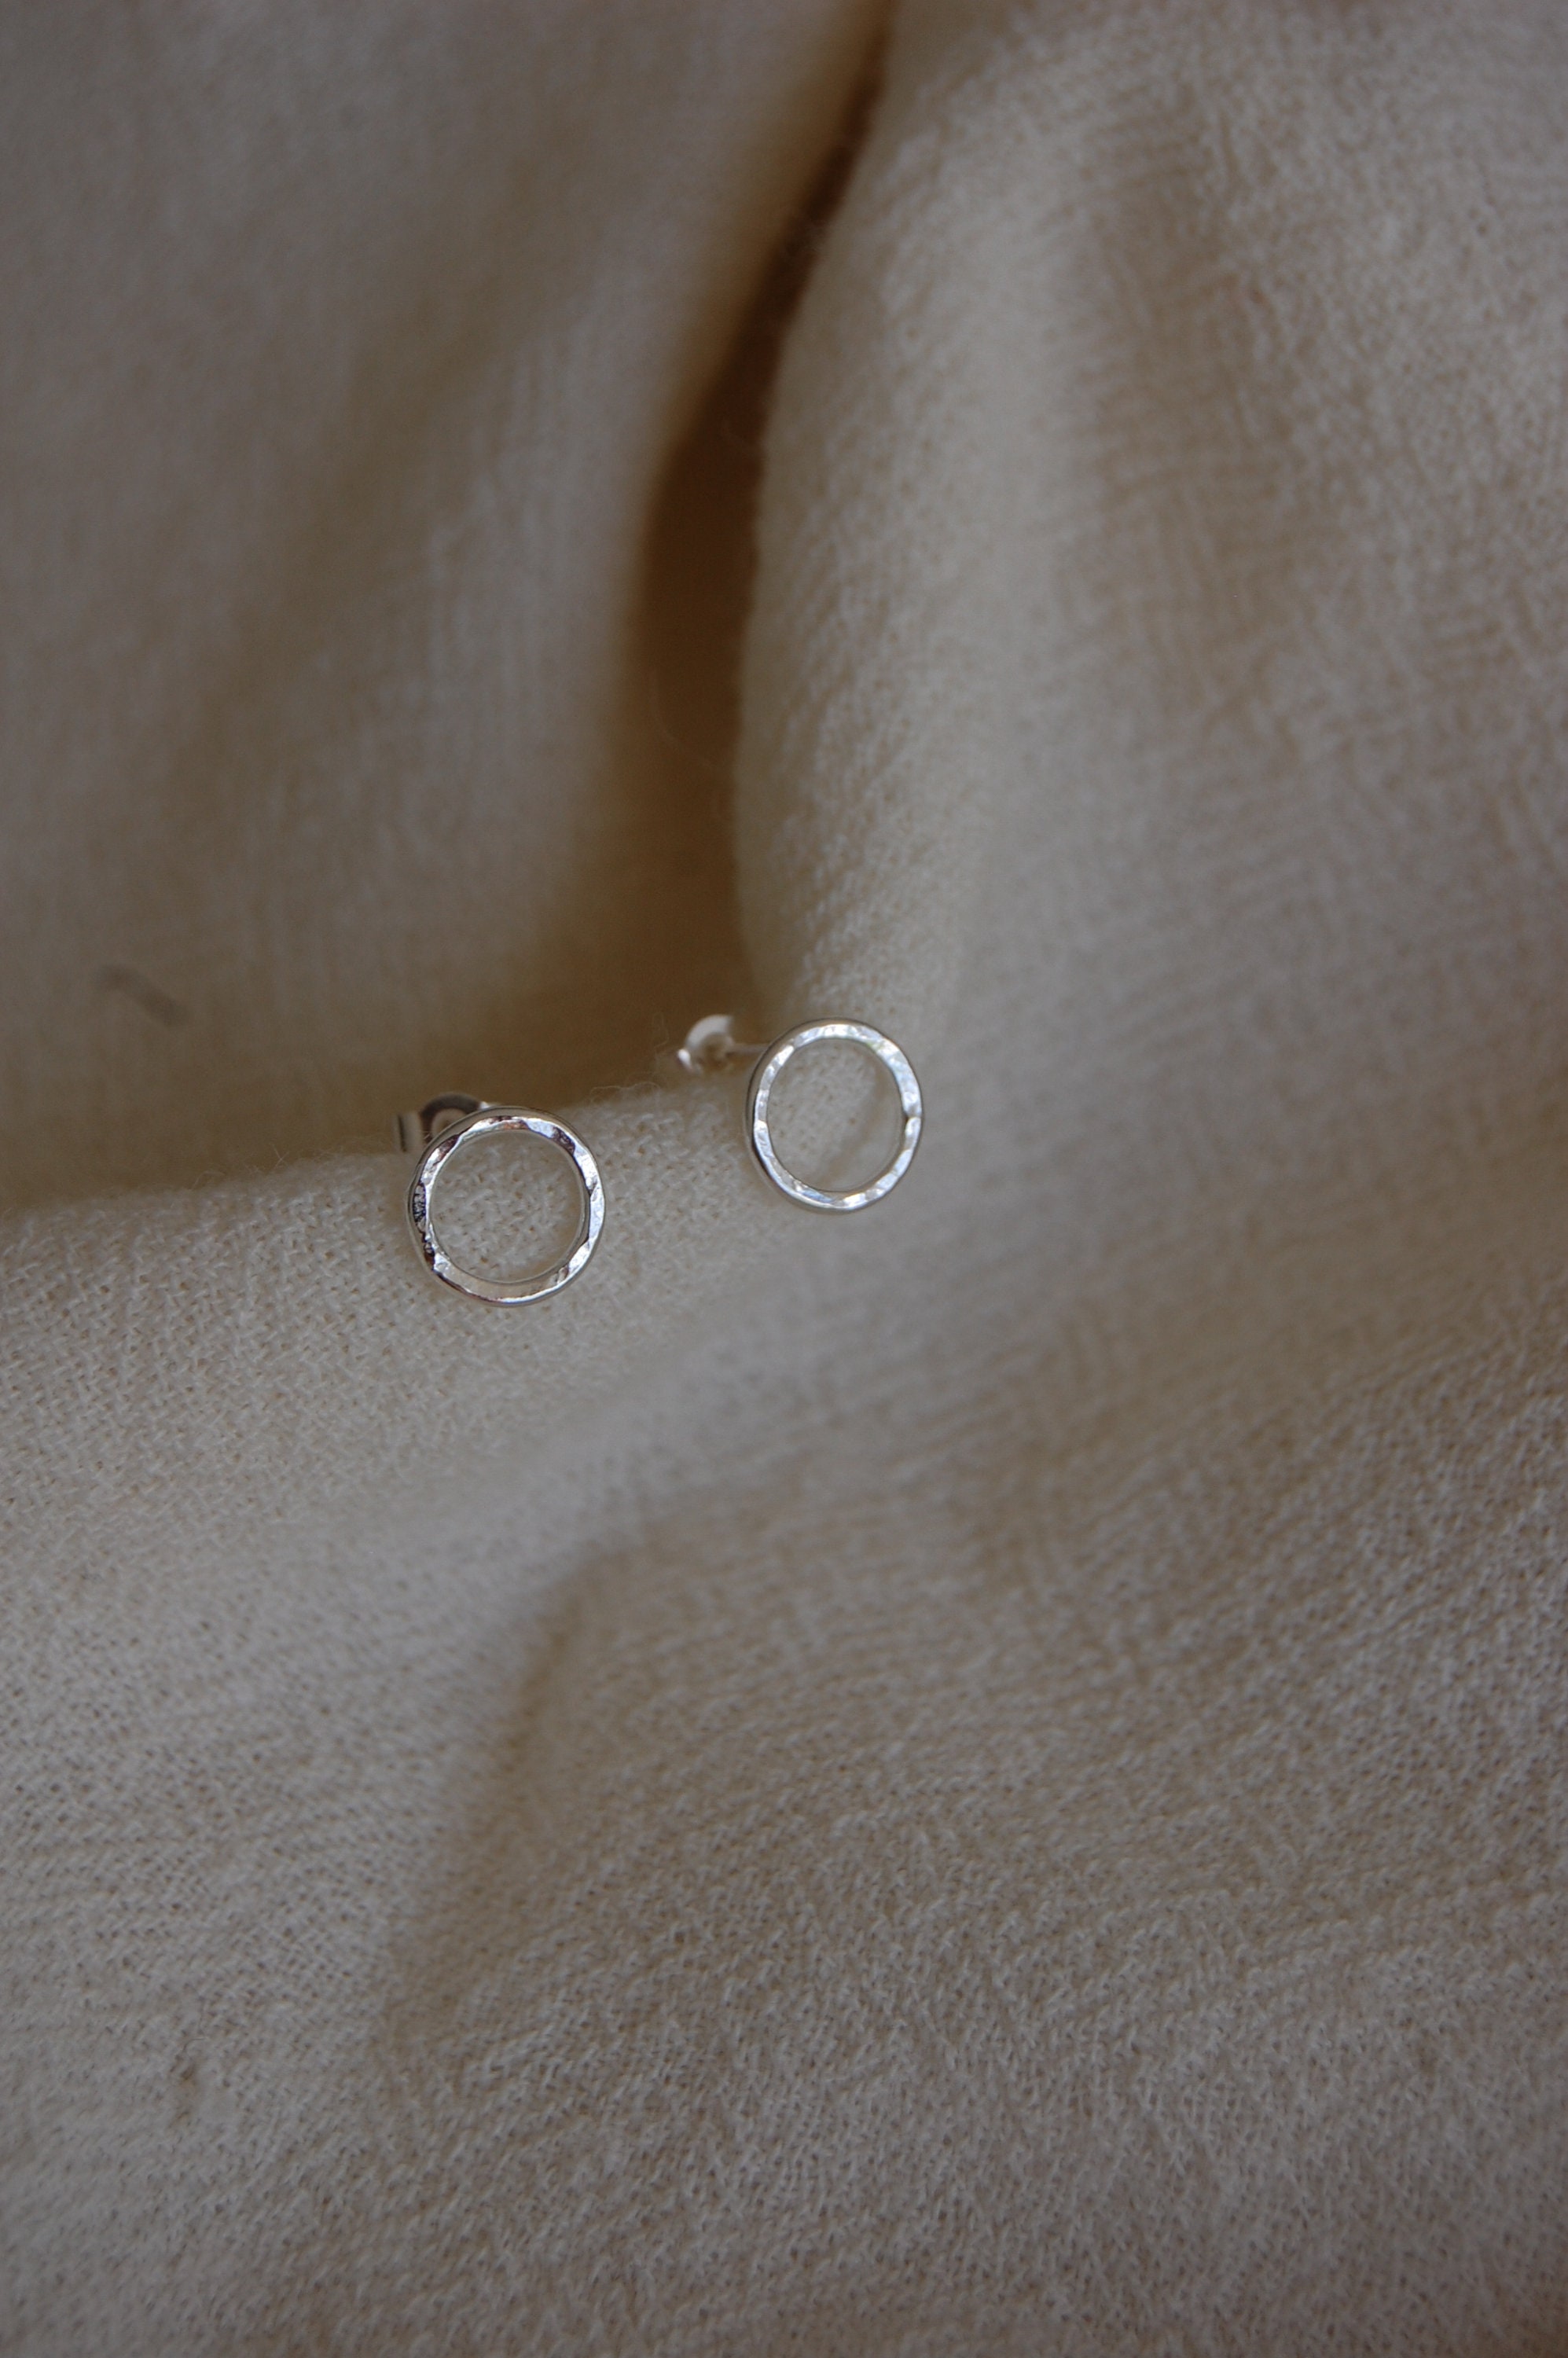 Sustainable Ethical Recycled Sterling Silver Stud Earrings - Etsy UK